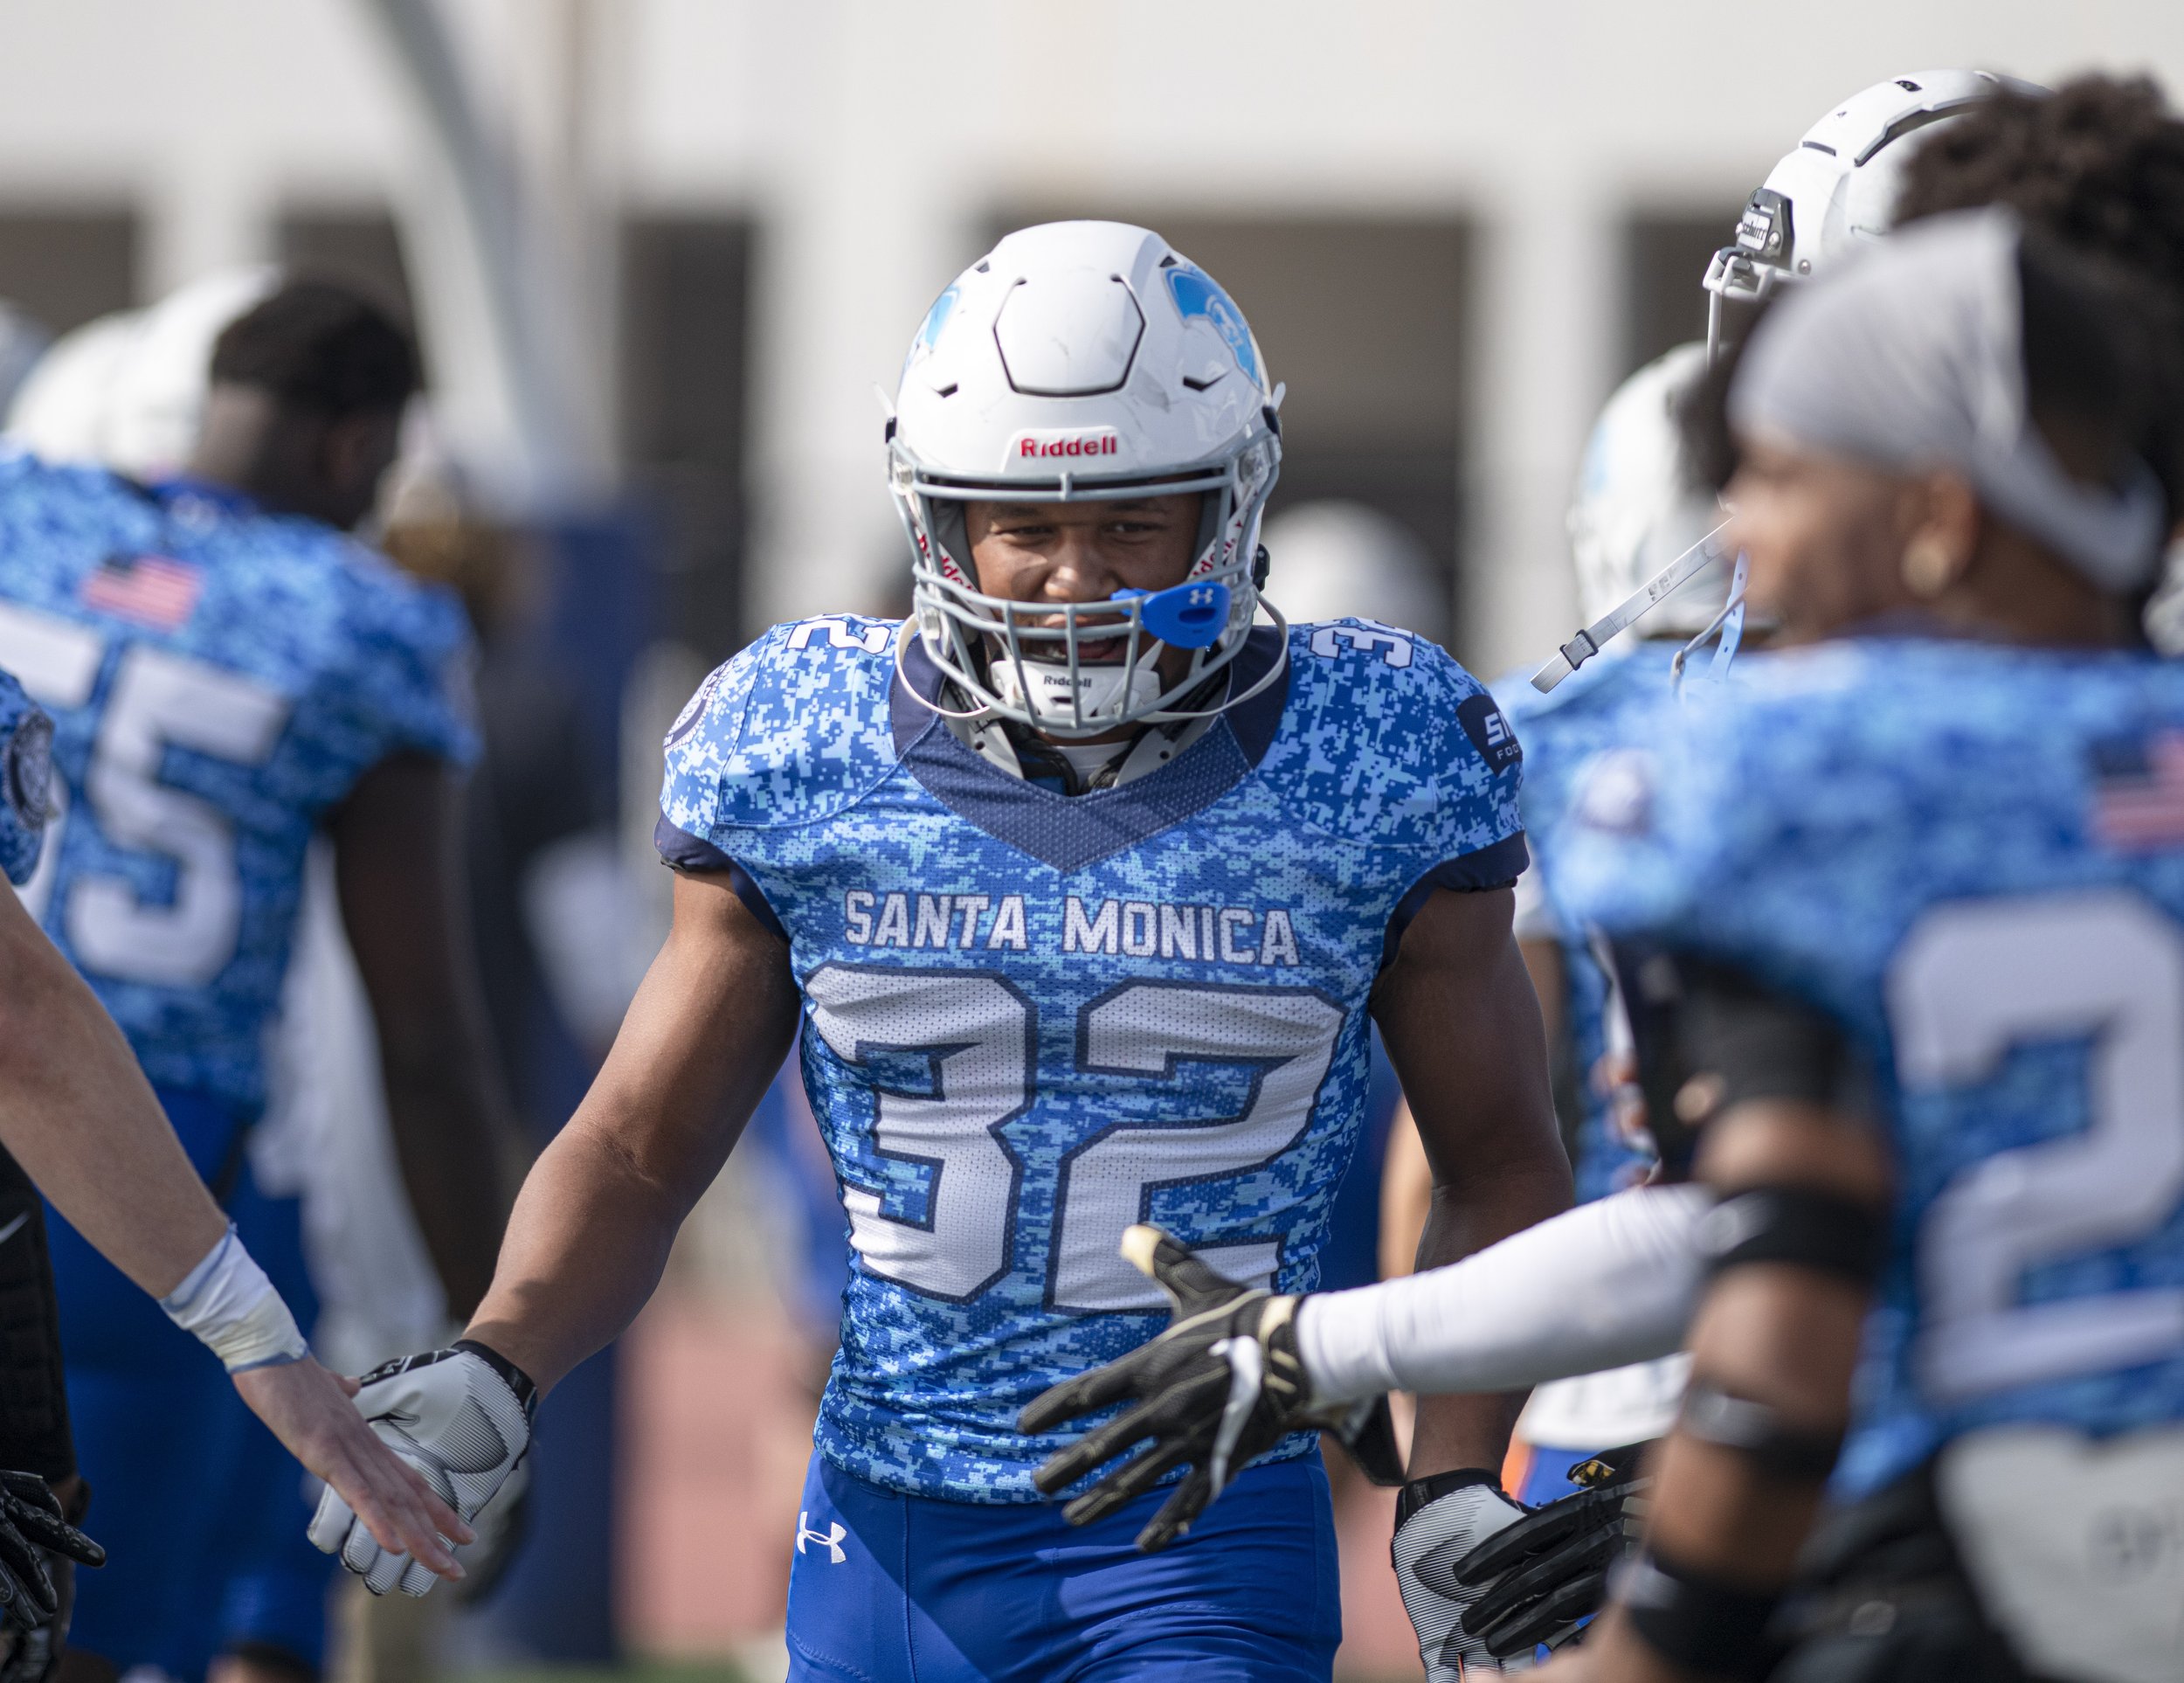  Corsairs sophomore runningback Hassan Biggus (32) runs through the row of SMC players as sophomores are announced for their final game against West L.A. College on Nov. 20, 2021 at Santa Monica College. Biggus received All Conference First Team Hono